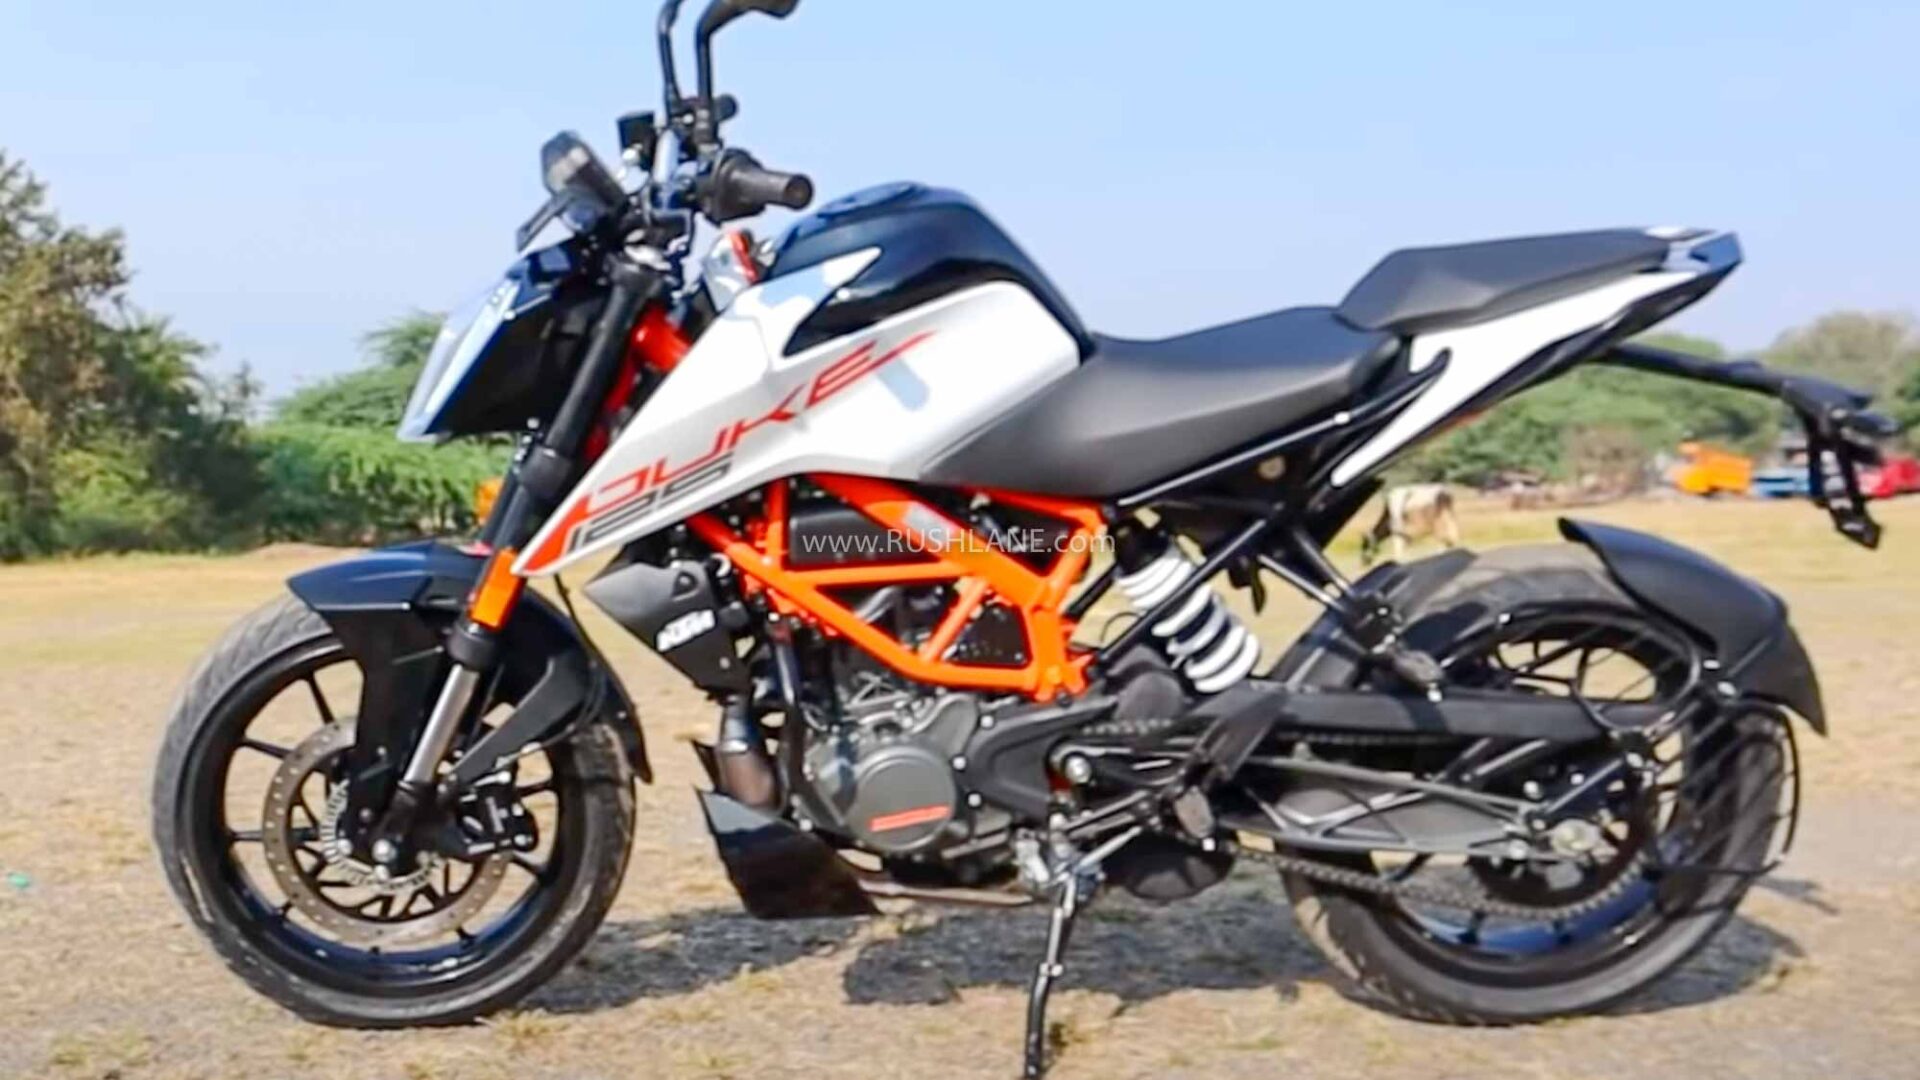 New KTM Duke 125 Launch Price Rs 1.5 Lakh - First Look Walkaround